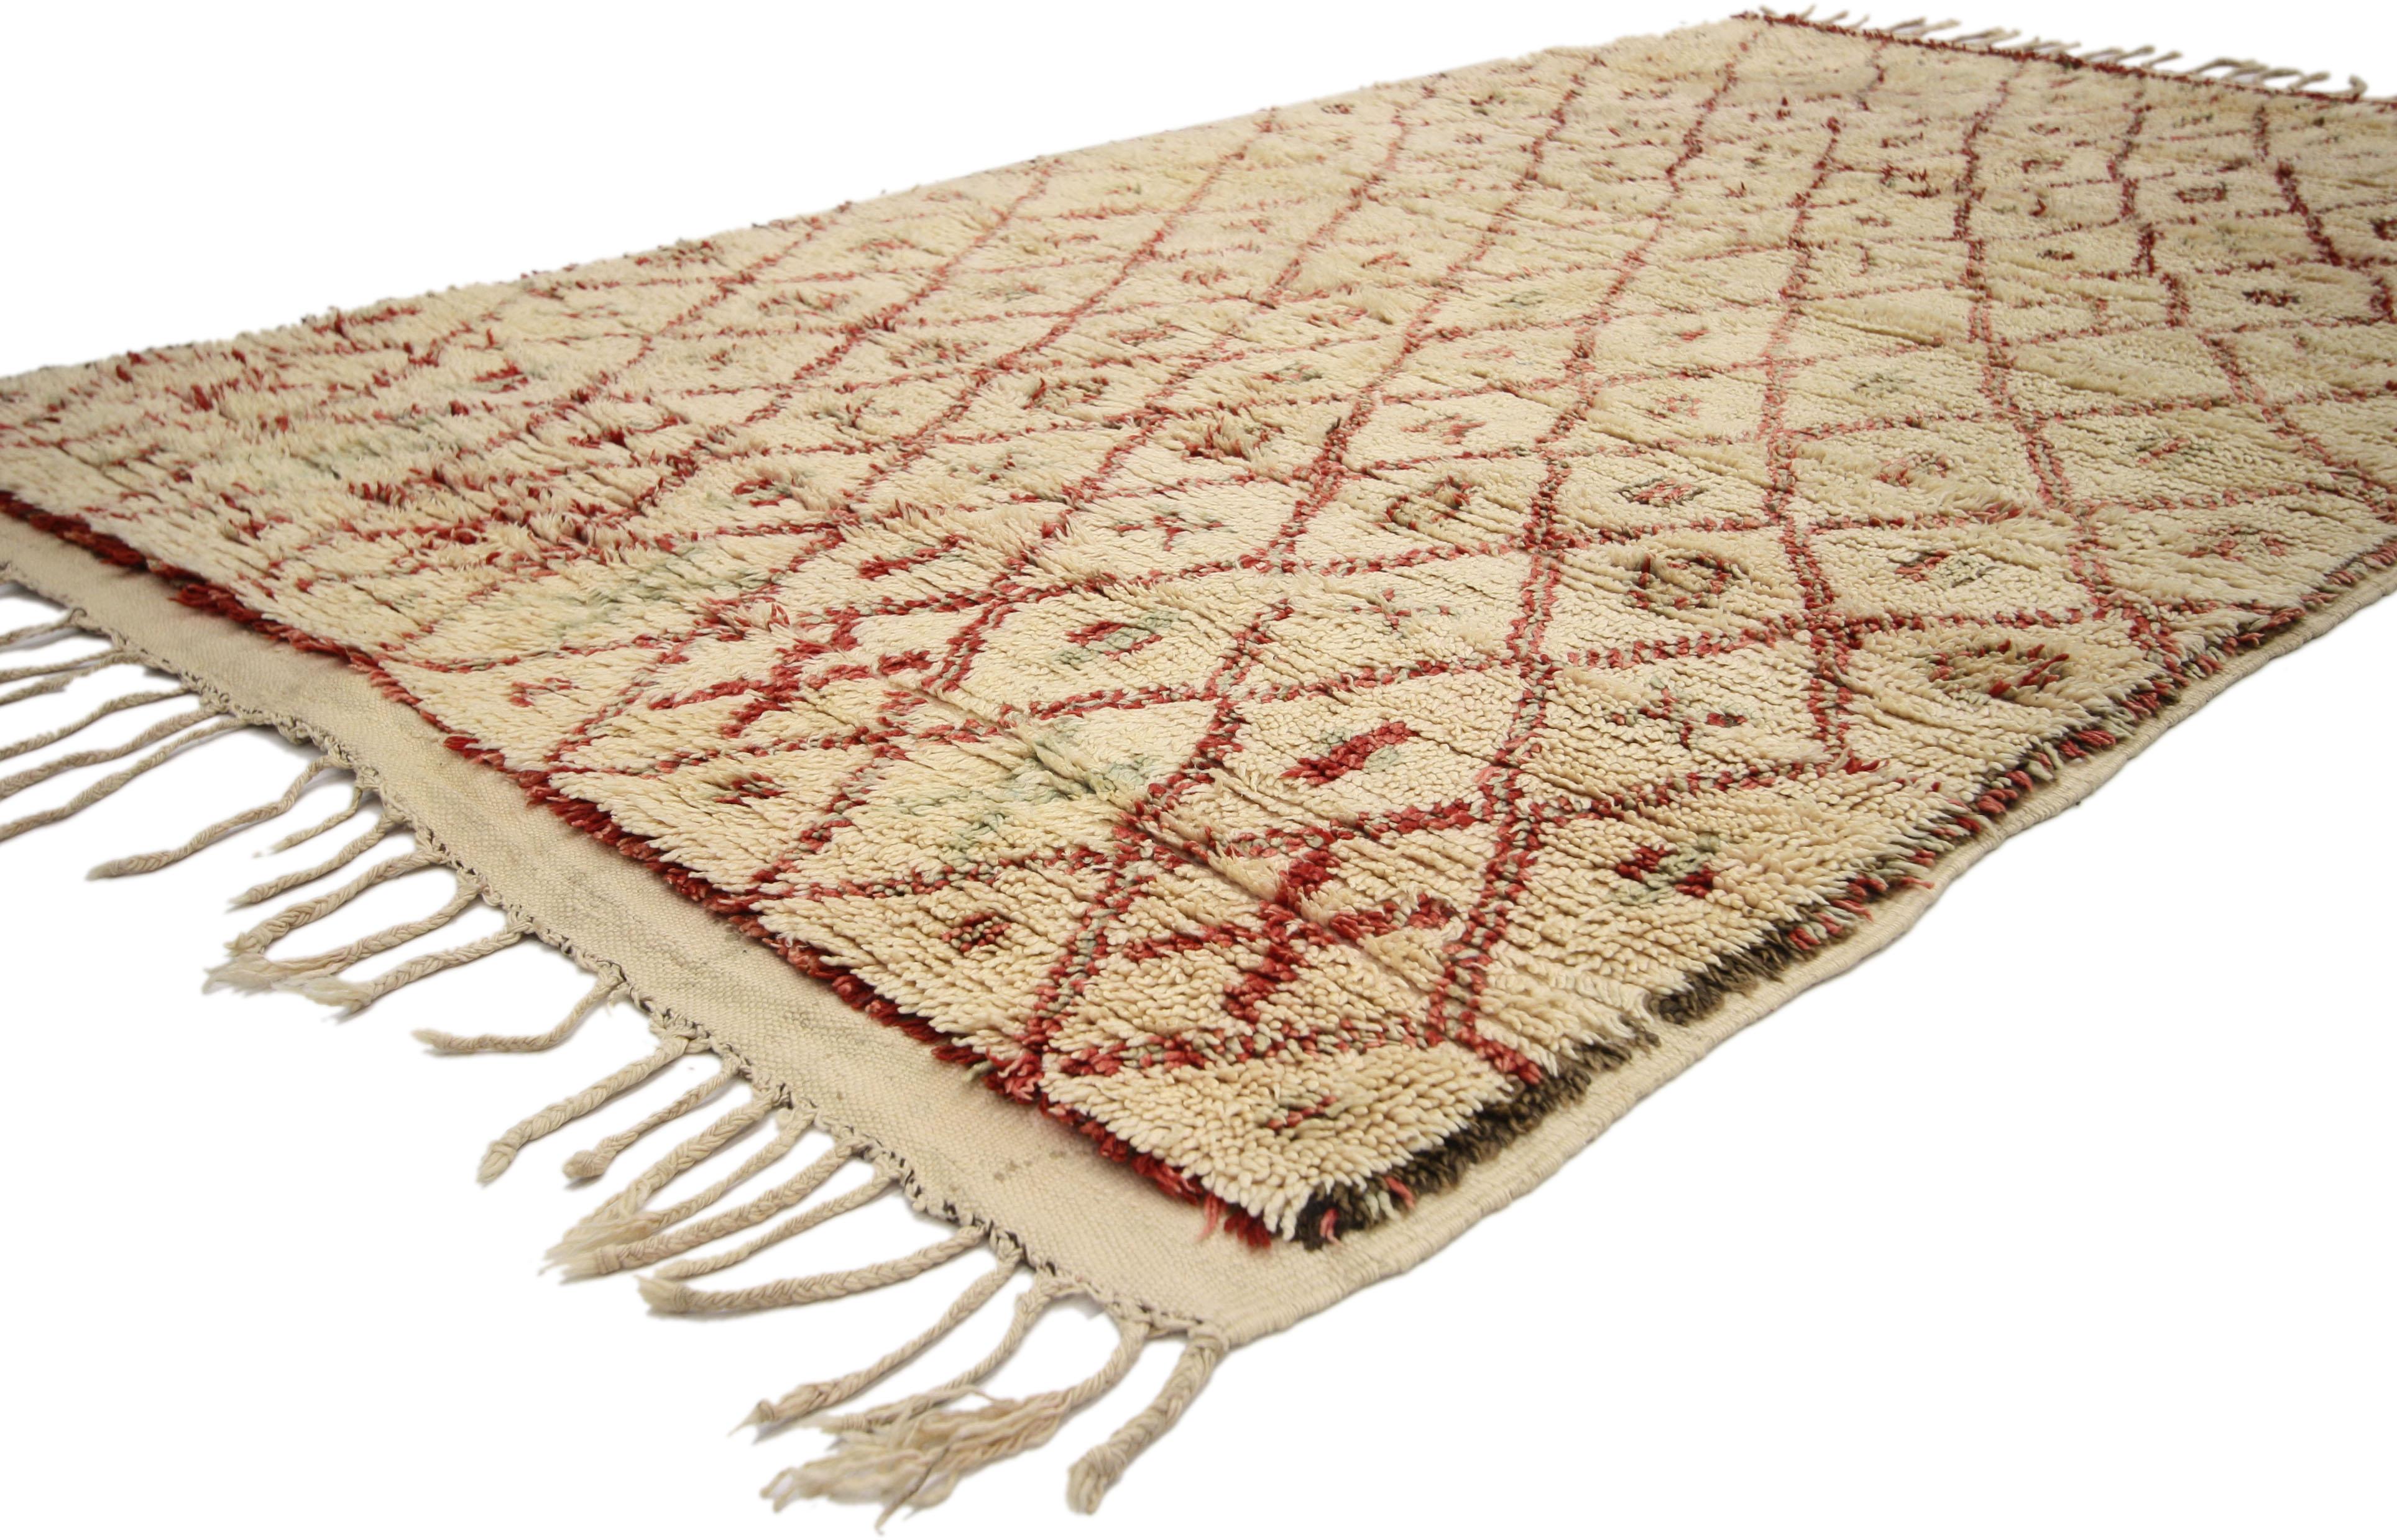 20747, vintage Berber Moroccan Azilal rug with tribal style, Moroccan Berber carpet. This hand-knotted wool vintage Moroccan Azilal rug is a striking example of the Berber tribe and their weaving skills. Dual colored lines form a diamond lattice on